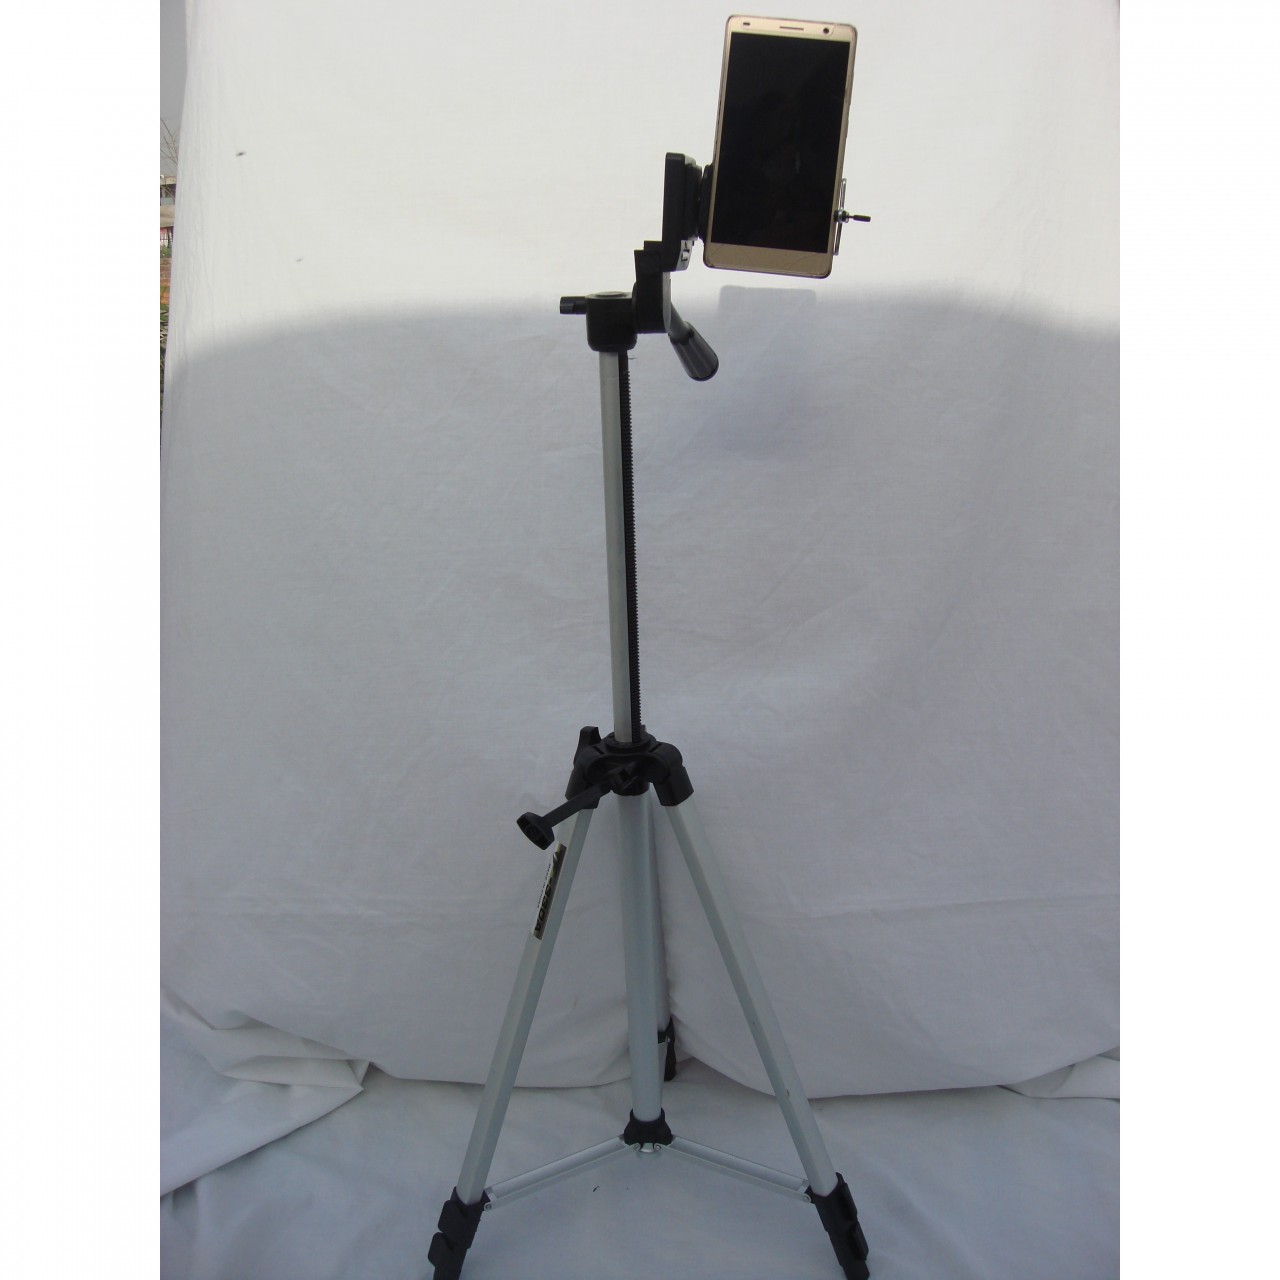 330 Tripo330 Tripod stand for mobile and camera bothd stand for mobile and camera both